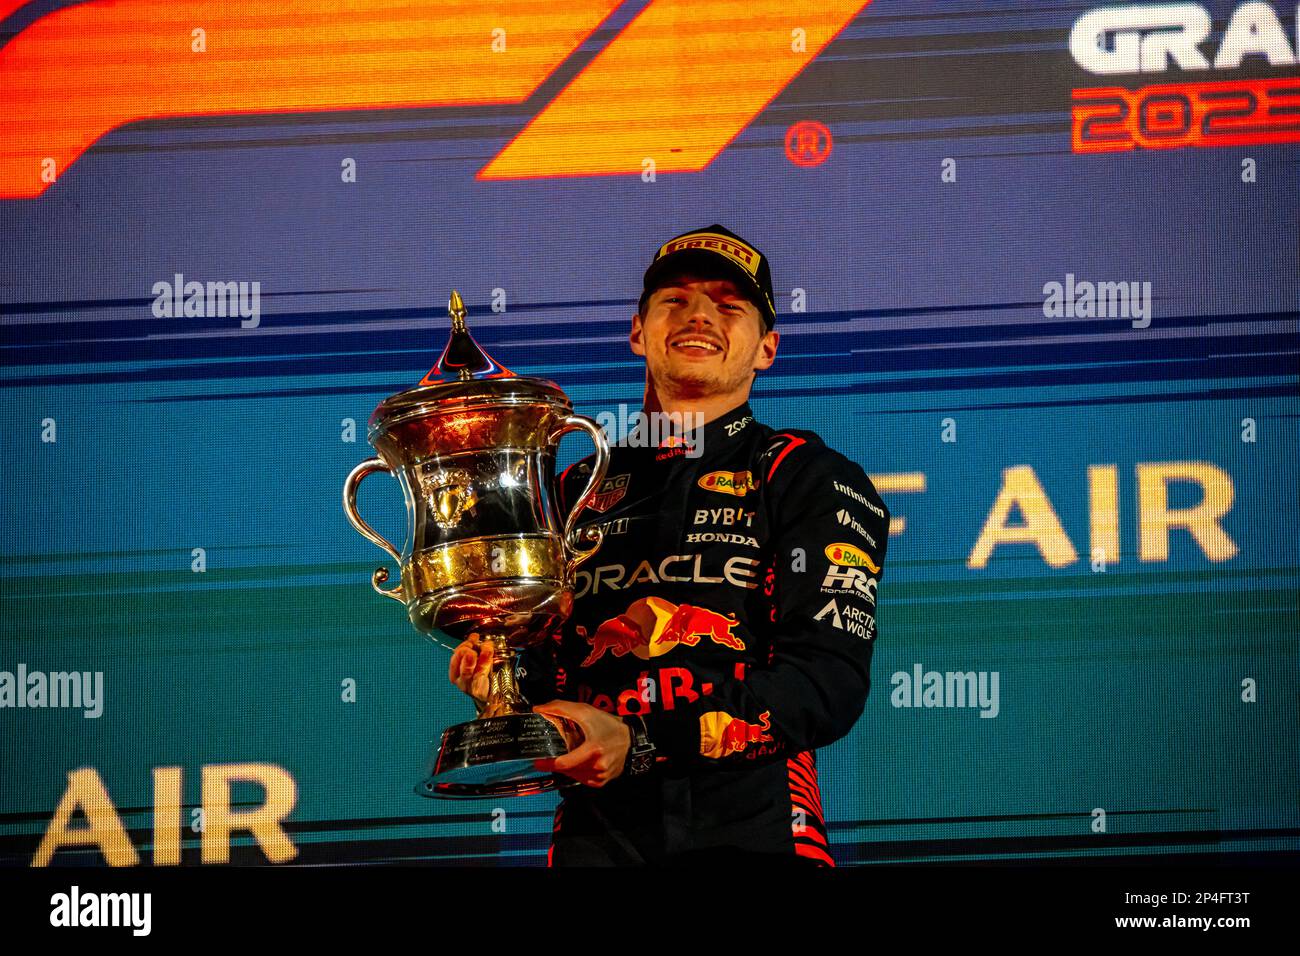 BAHRAIN INTERNATIONAL CIRCUIT, BAHRAIN - MARCH 05: Max Verstappen, Red Bull Racing RB19 during the Bahrain Grand Prix at Bahrain International Circuit on Sunday March 05, 2023 in Sakhir, Bahrain. (Photo by Michael Potts/BSR Agency) Stock Photo